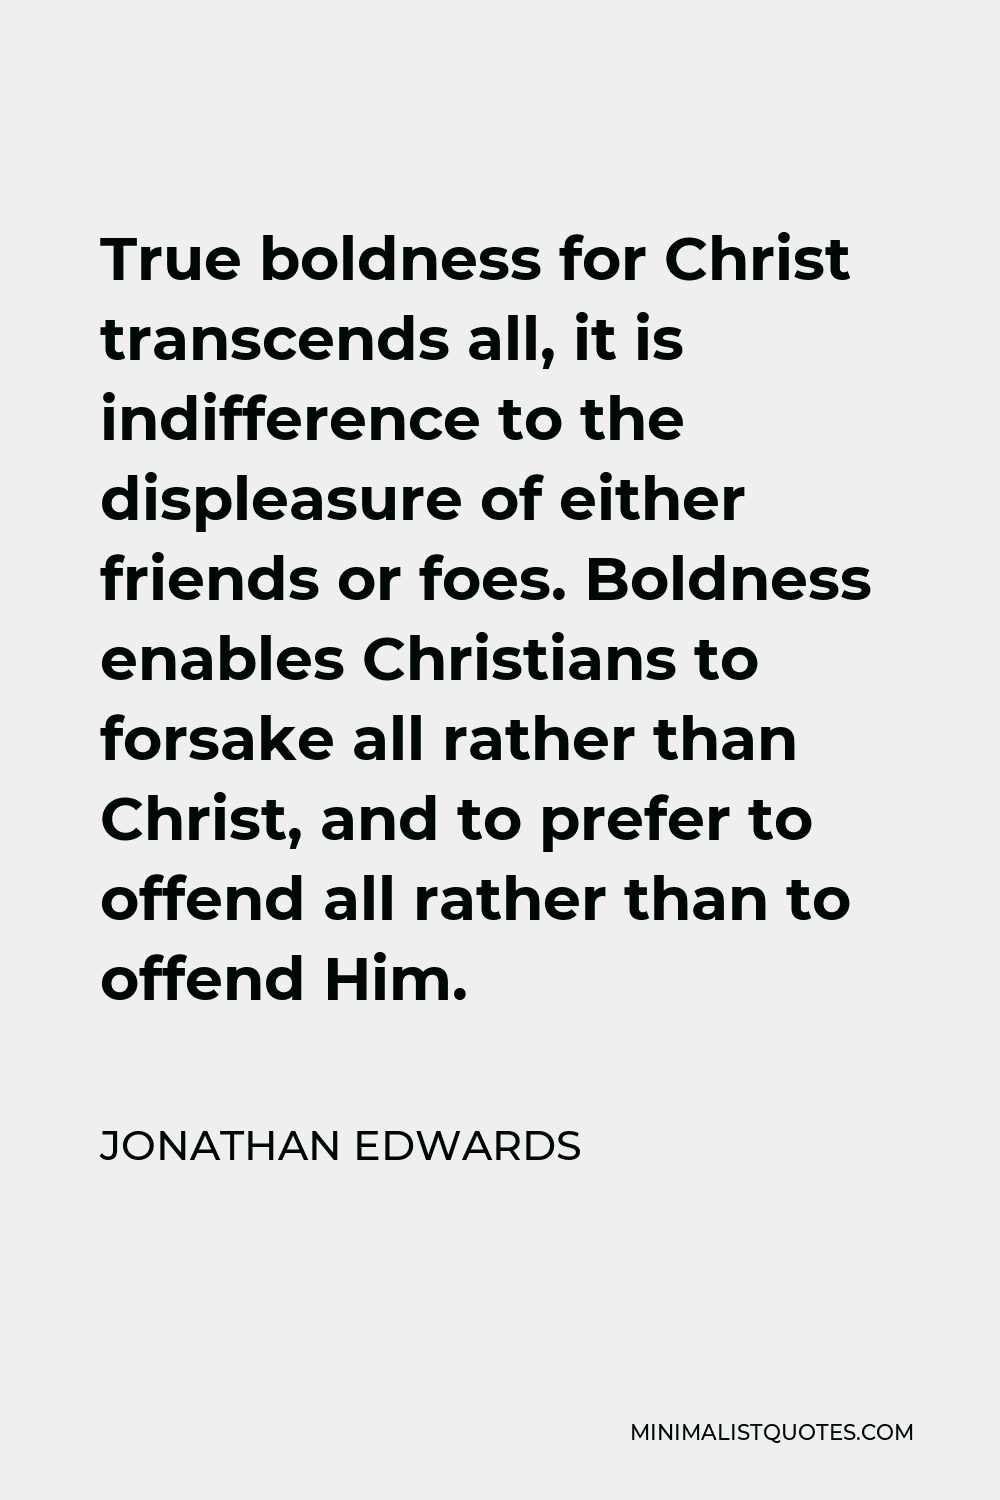 Jonathan Edwards Quote - True boldness for Christ transcends all, it is indifference to the displeasure of either friends or foes. Boldness enables Christians to forsake all rather than Christ, and to prefer to offend all rather than to offend Him.